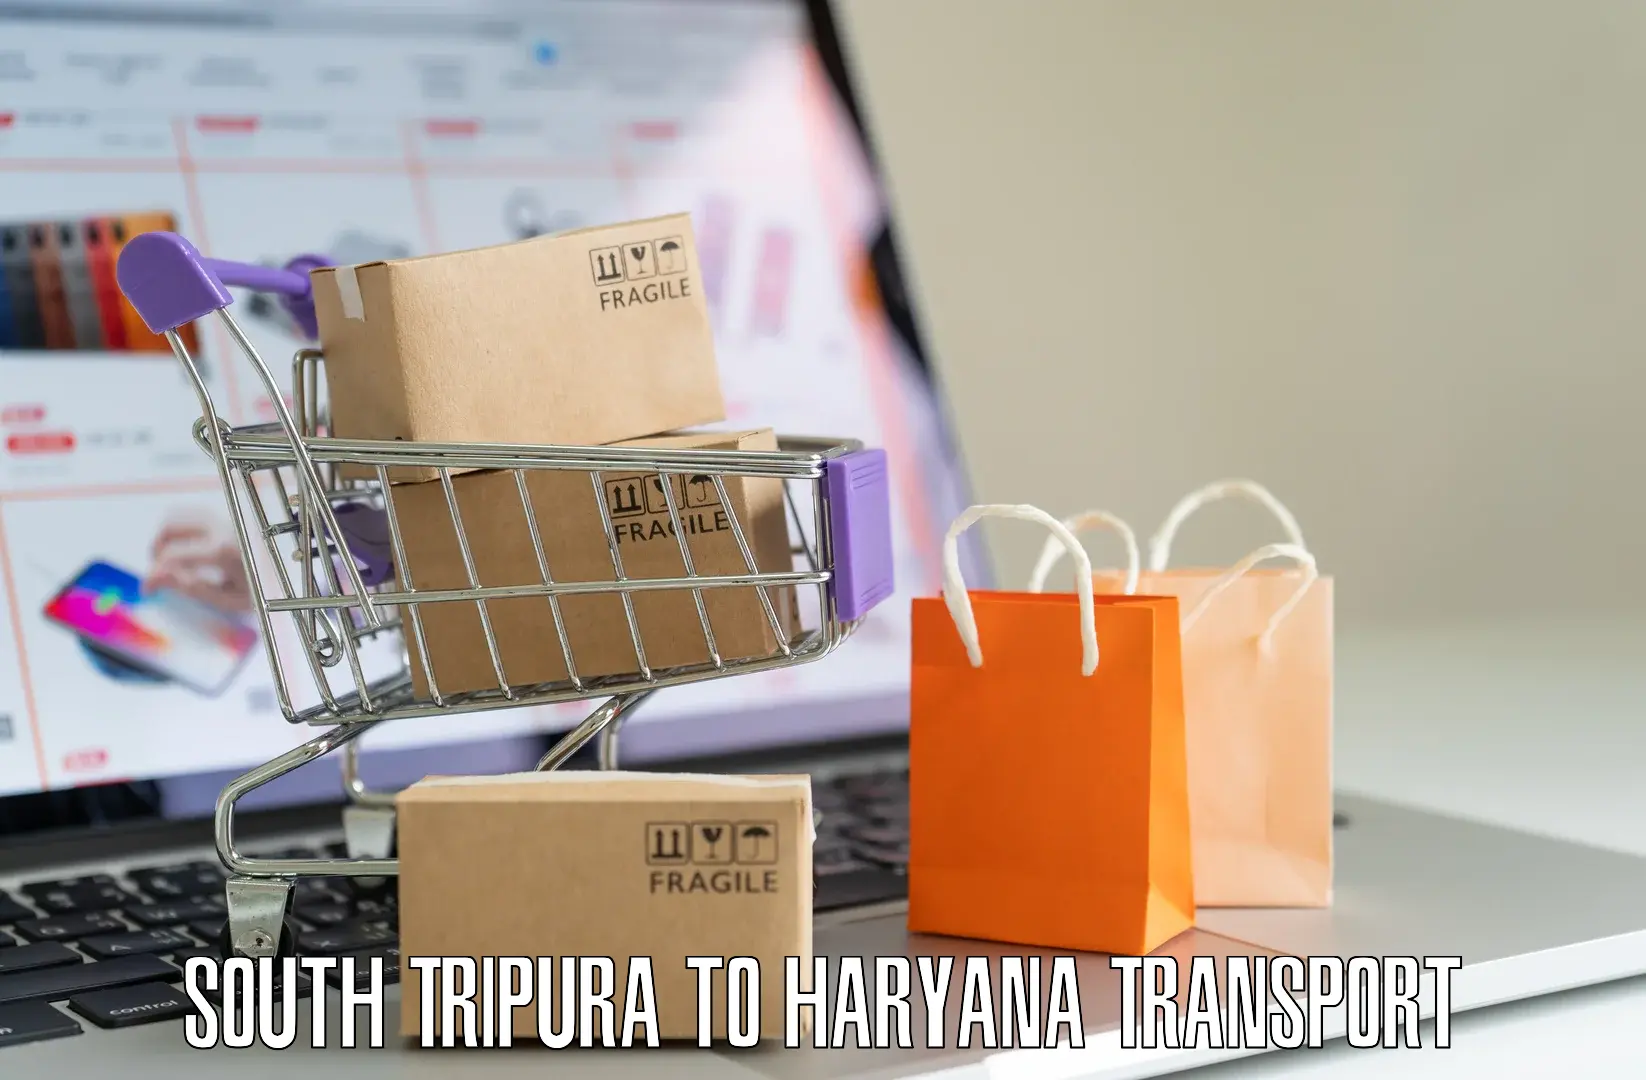 Daily parcel service transport South Tripura to Pinjore